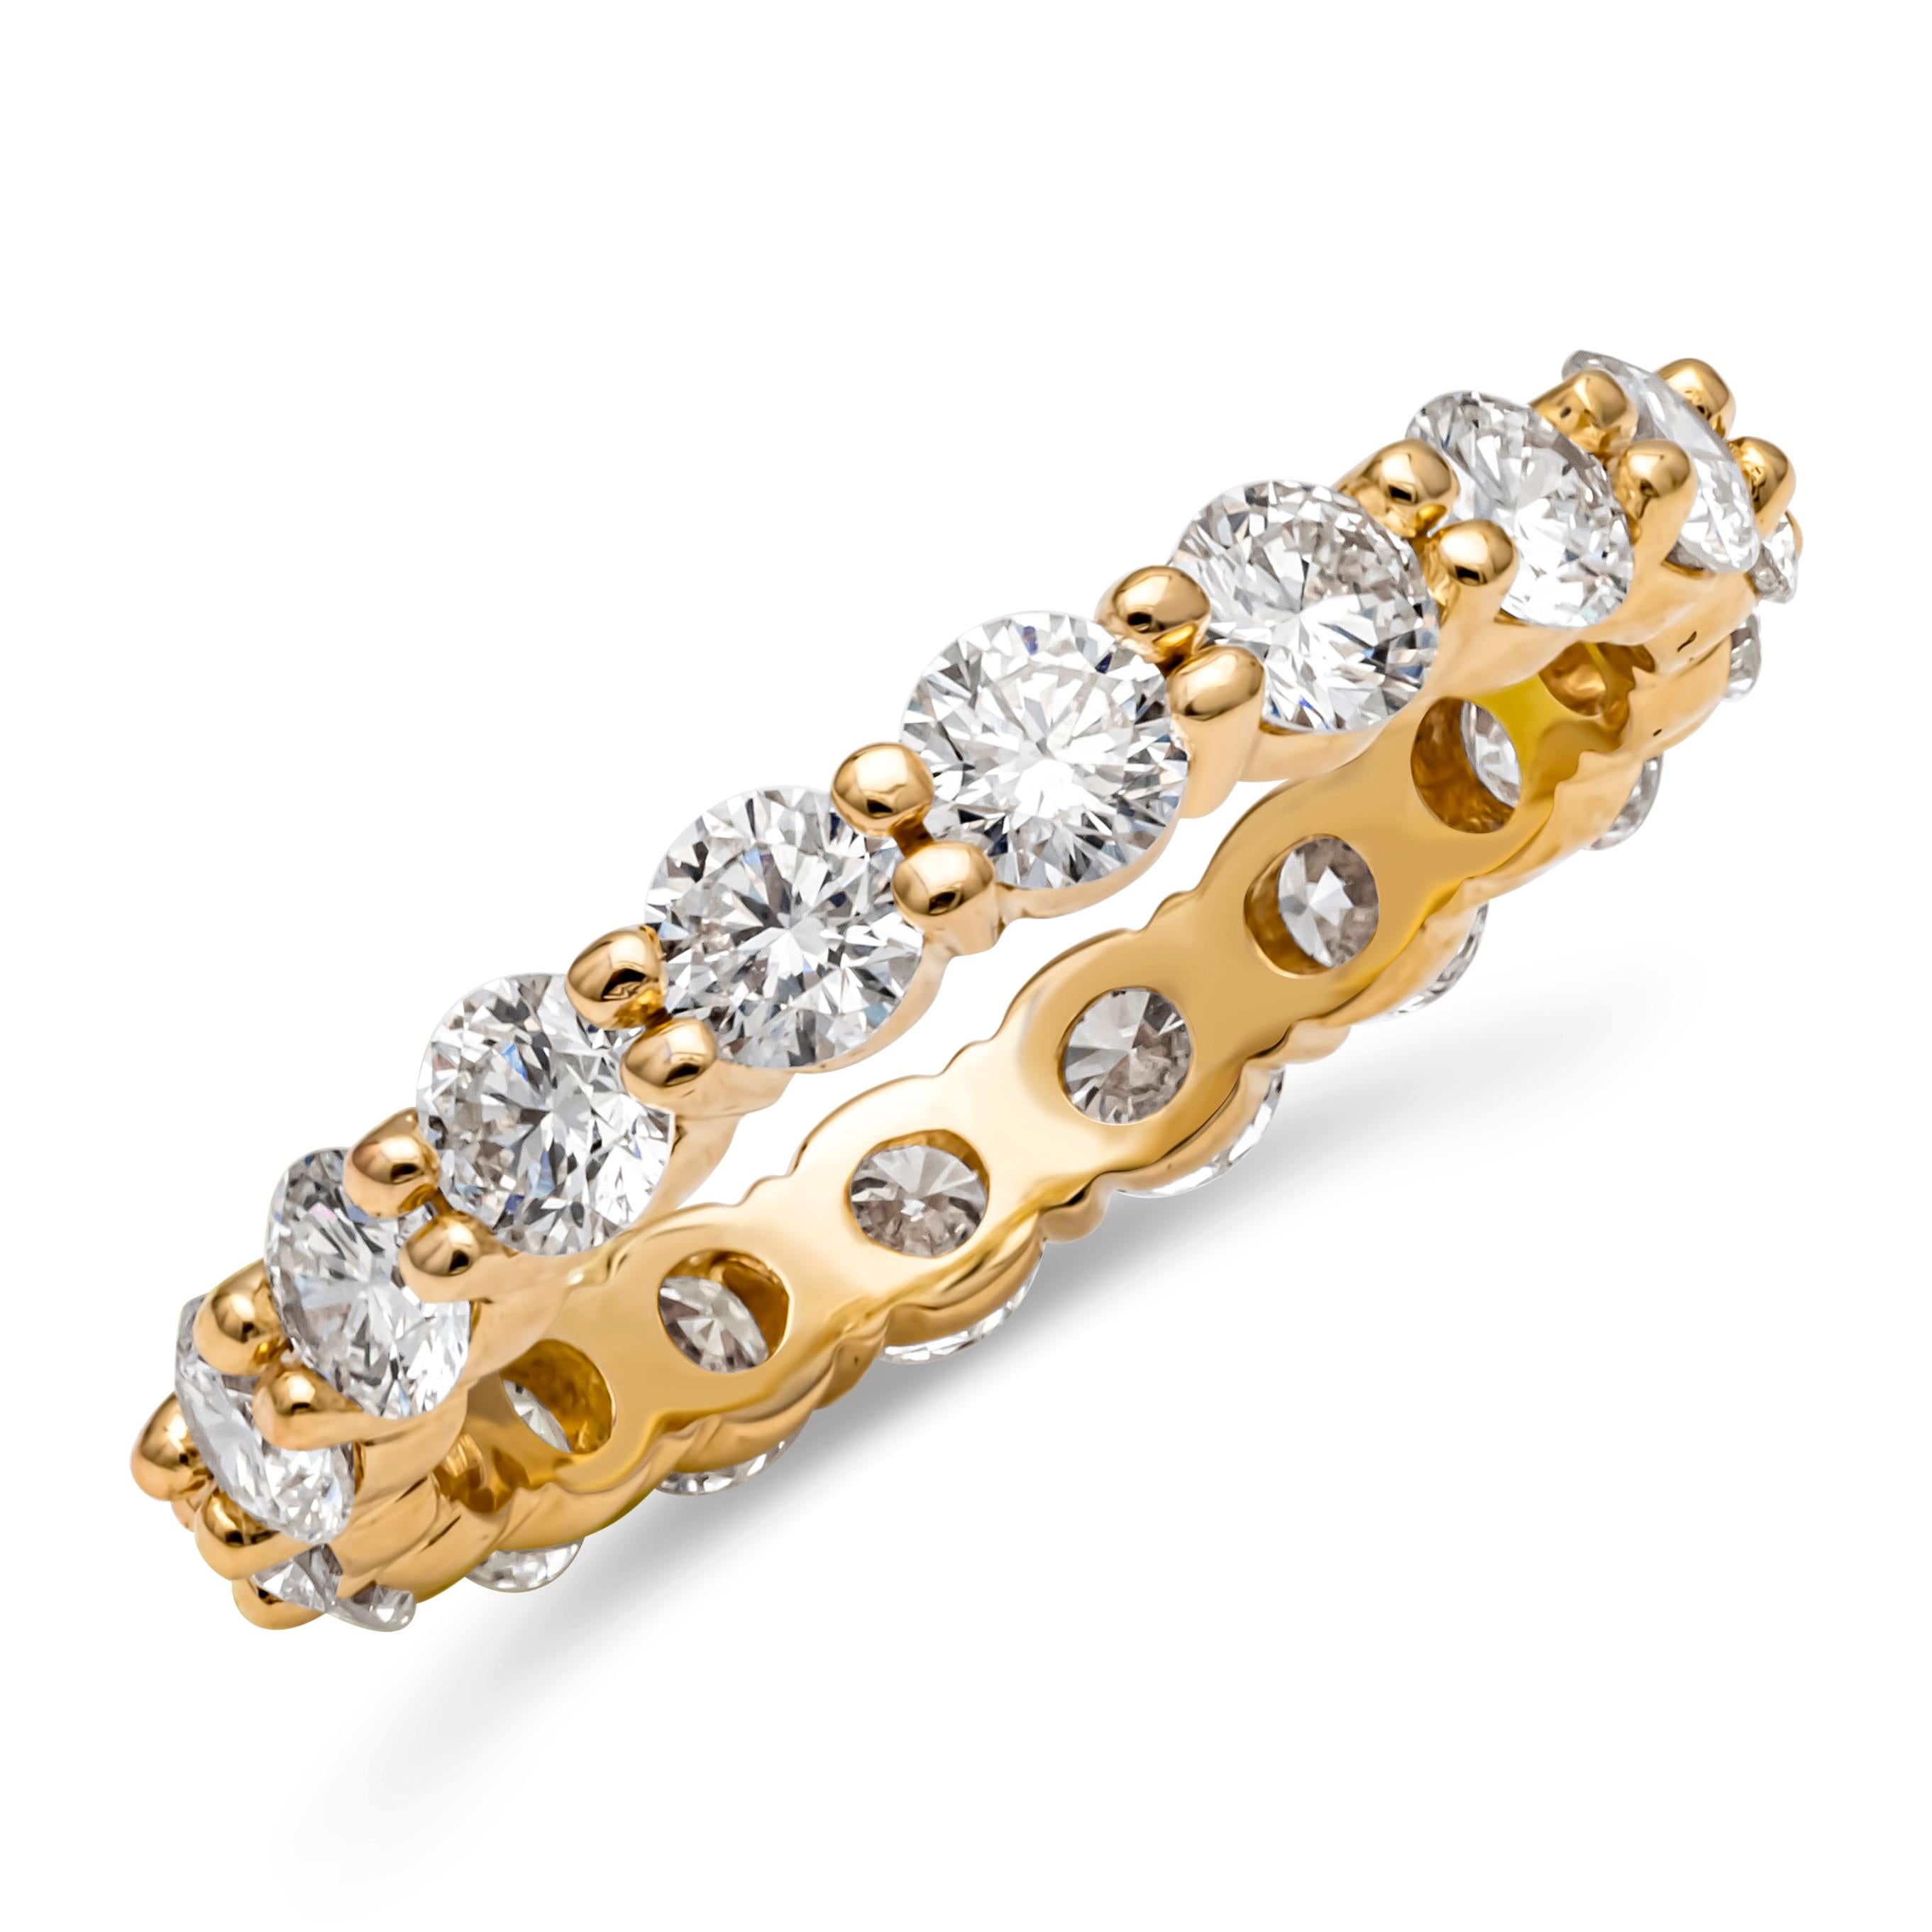 This classic eternity wedding band showcases a line of 18 brilliant round cut diamonds weighing 2.30 carats total, G color and VS+ in clarity, set in a timeless shared prong basket setting and Finely made in 14K Yellow Gold. Size 6.75 US resizable